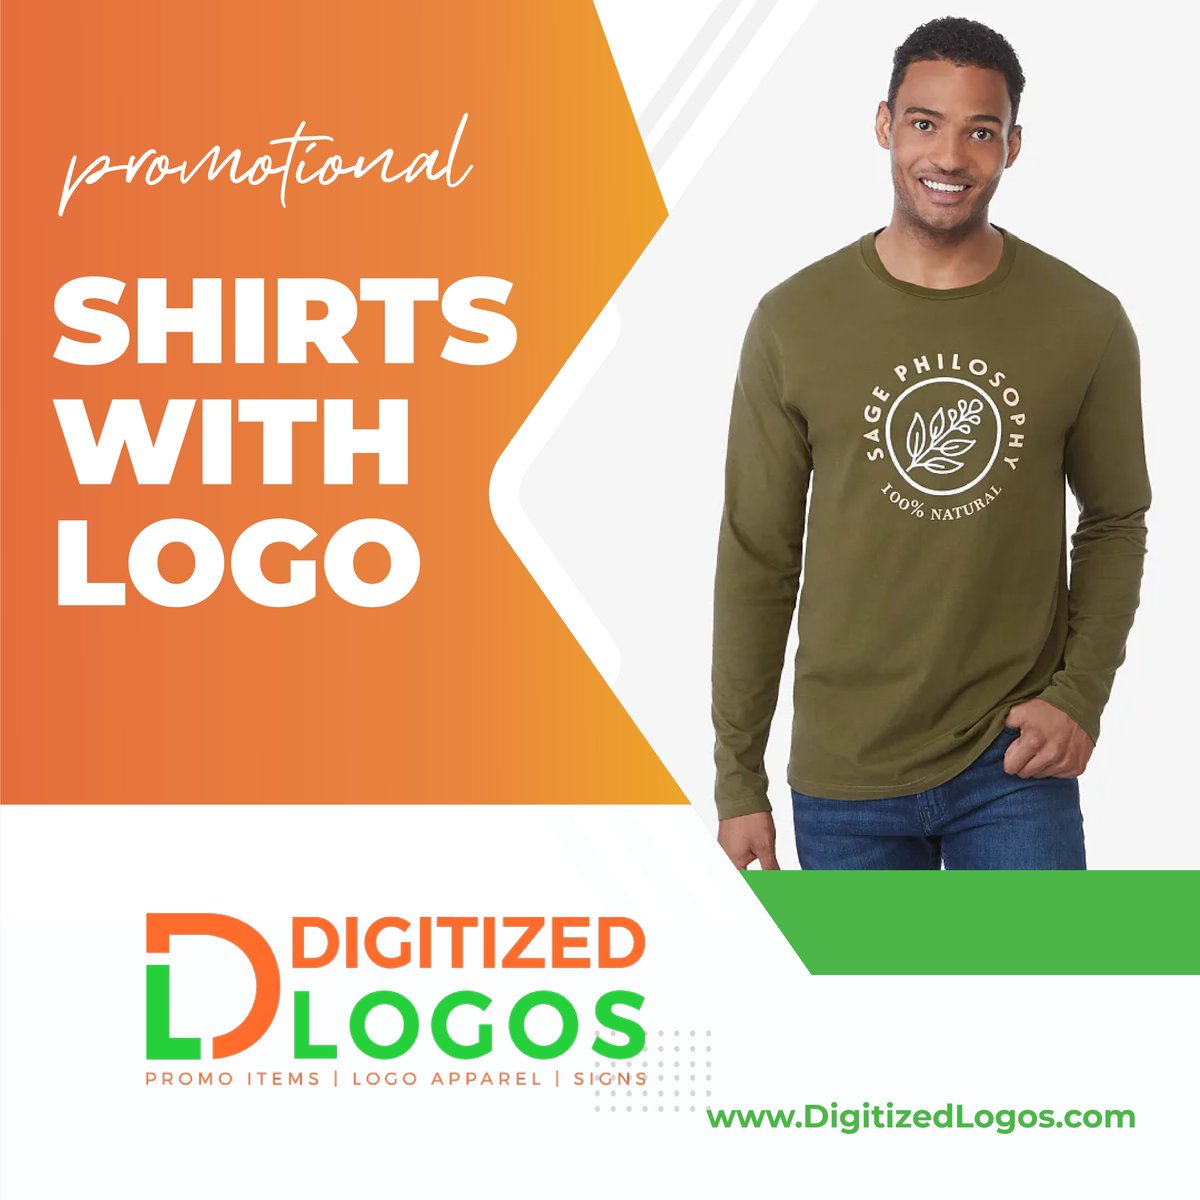 You may buy the promotional shirts with the logo to manage your styling with a basic change. It is also easy to show your style in an advanced way with the help of our team at Digitized Logos. Order: digitizedlogos.com

#customshirts #logoshirts #tshirts #teeshirts #logo